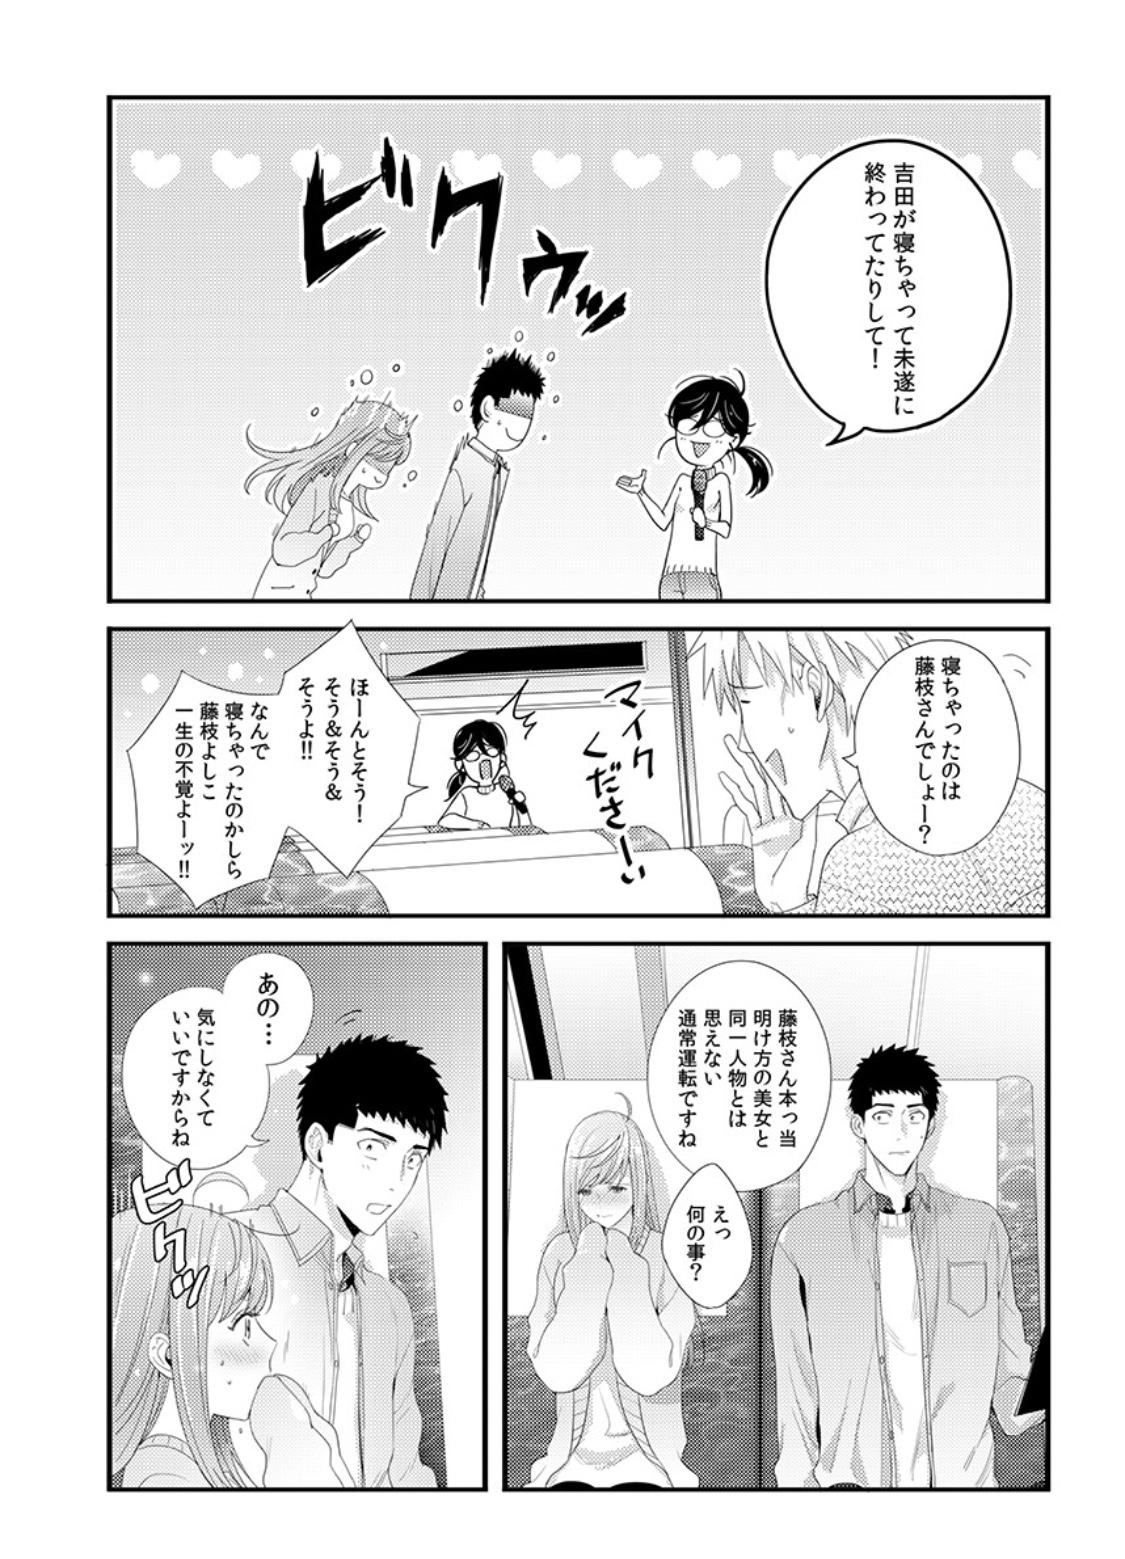 Please Let Me Hold You Futaba-San! Ch. 1+2 32